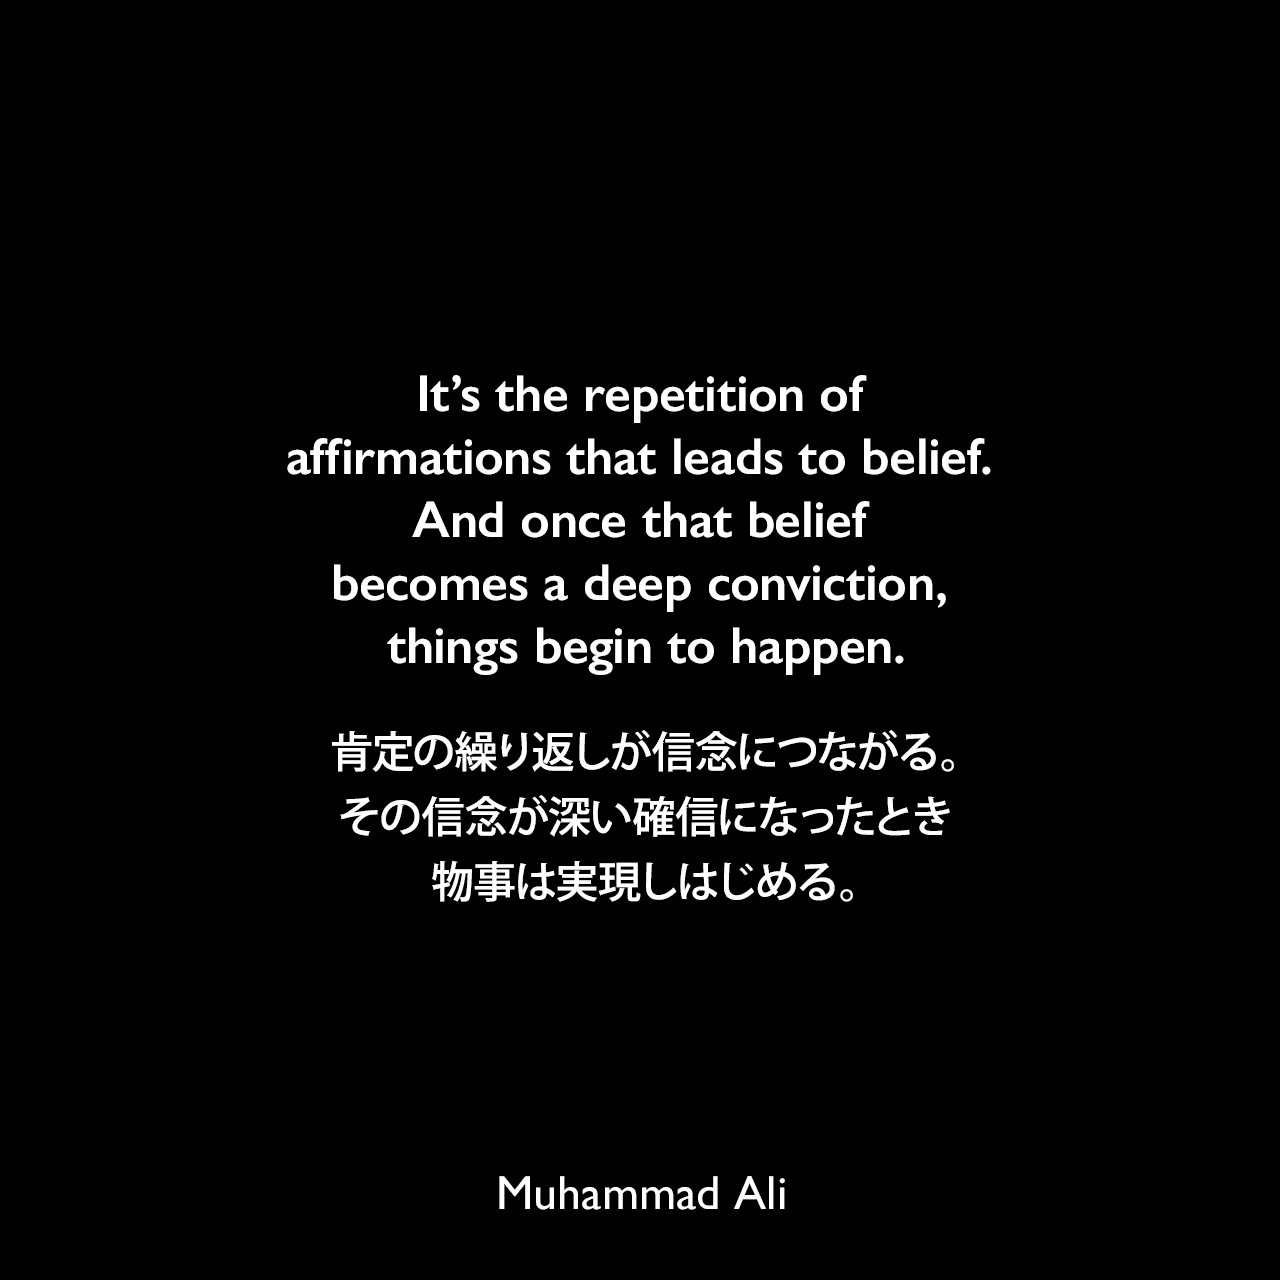 It’s the repetition of affirmations that leads to belief. And once that belief becomes a deep conviction, things begin to happen.肯定の繰り返しが信念につながる。その信念が深い確信になったとき、物事は実現しはじめる。